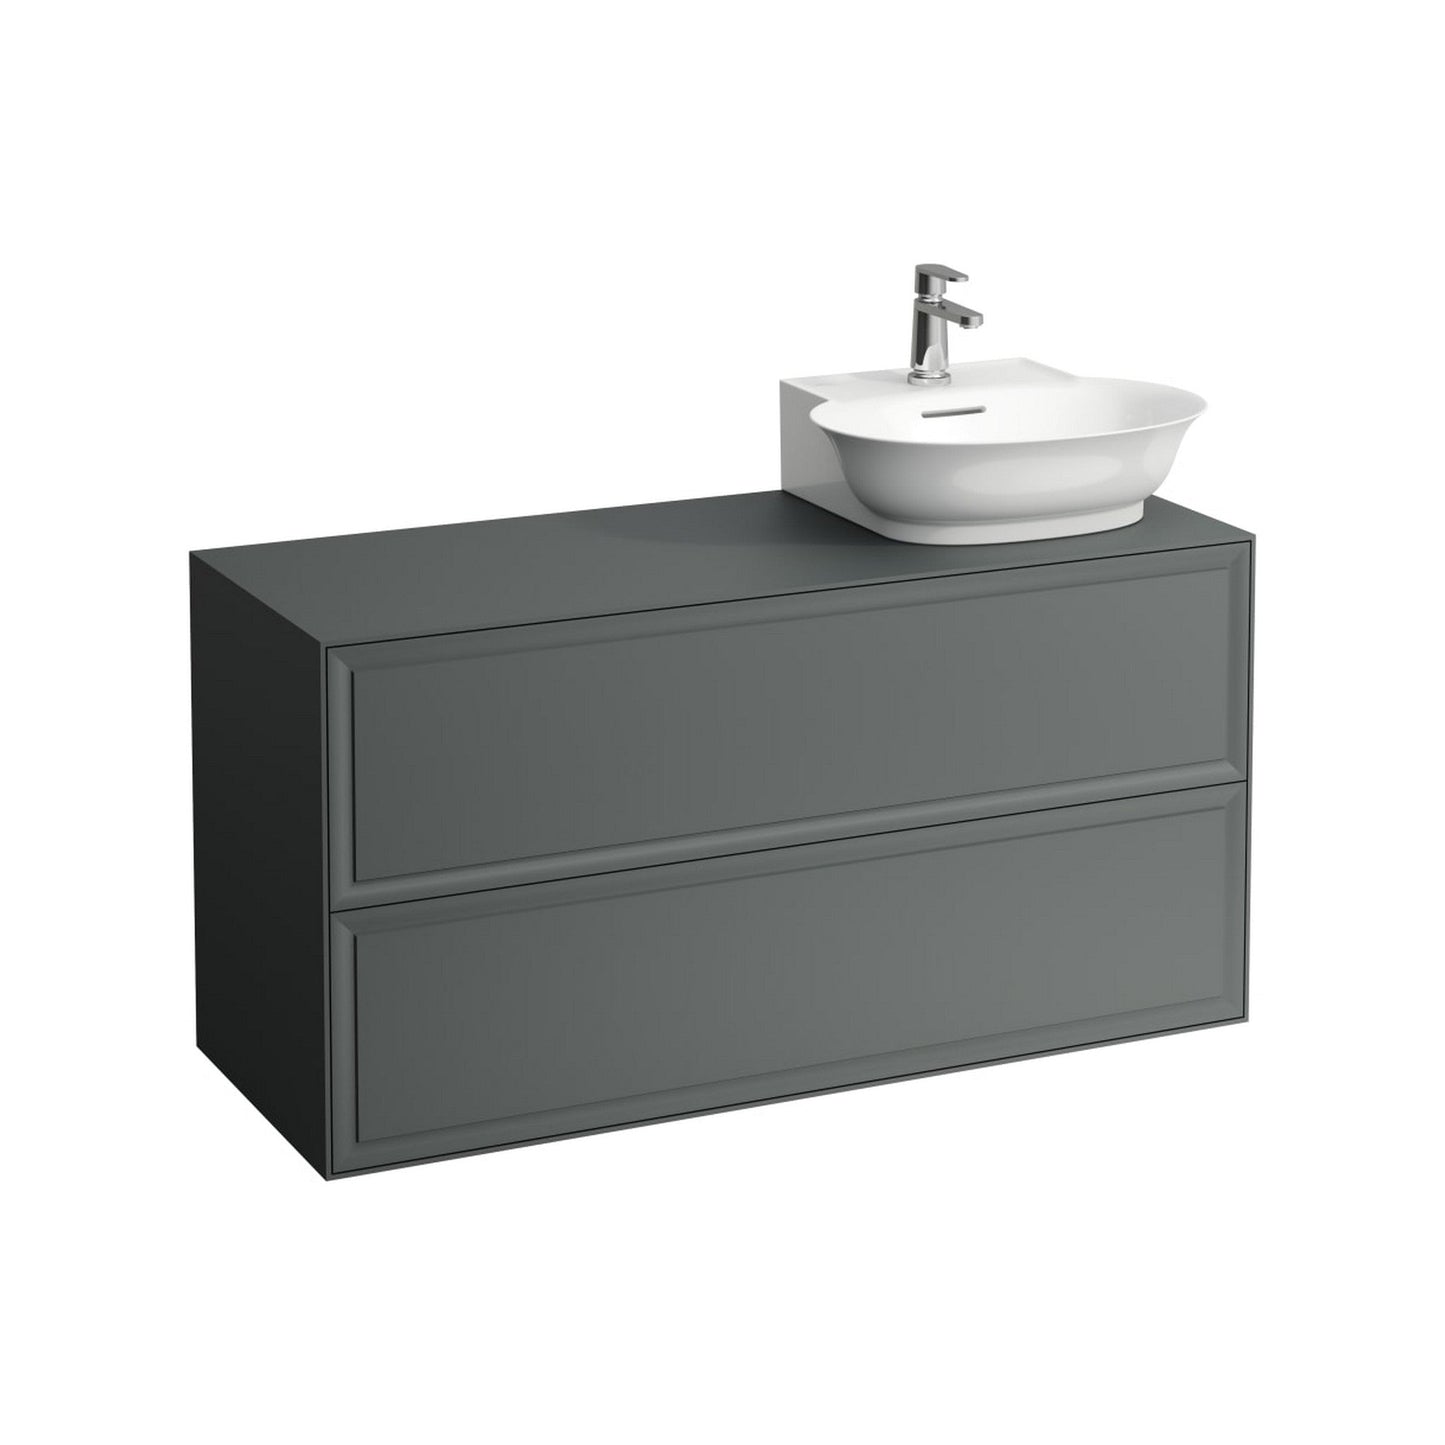 Laufen New Classic 46" 2-Drawer Traffic Gray Wall-Mounted Vanity With Sink Cut-out on the Right for New Classic Bathroom Sink Model: H816852